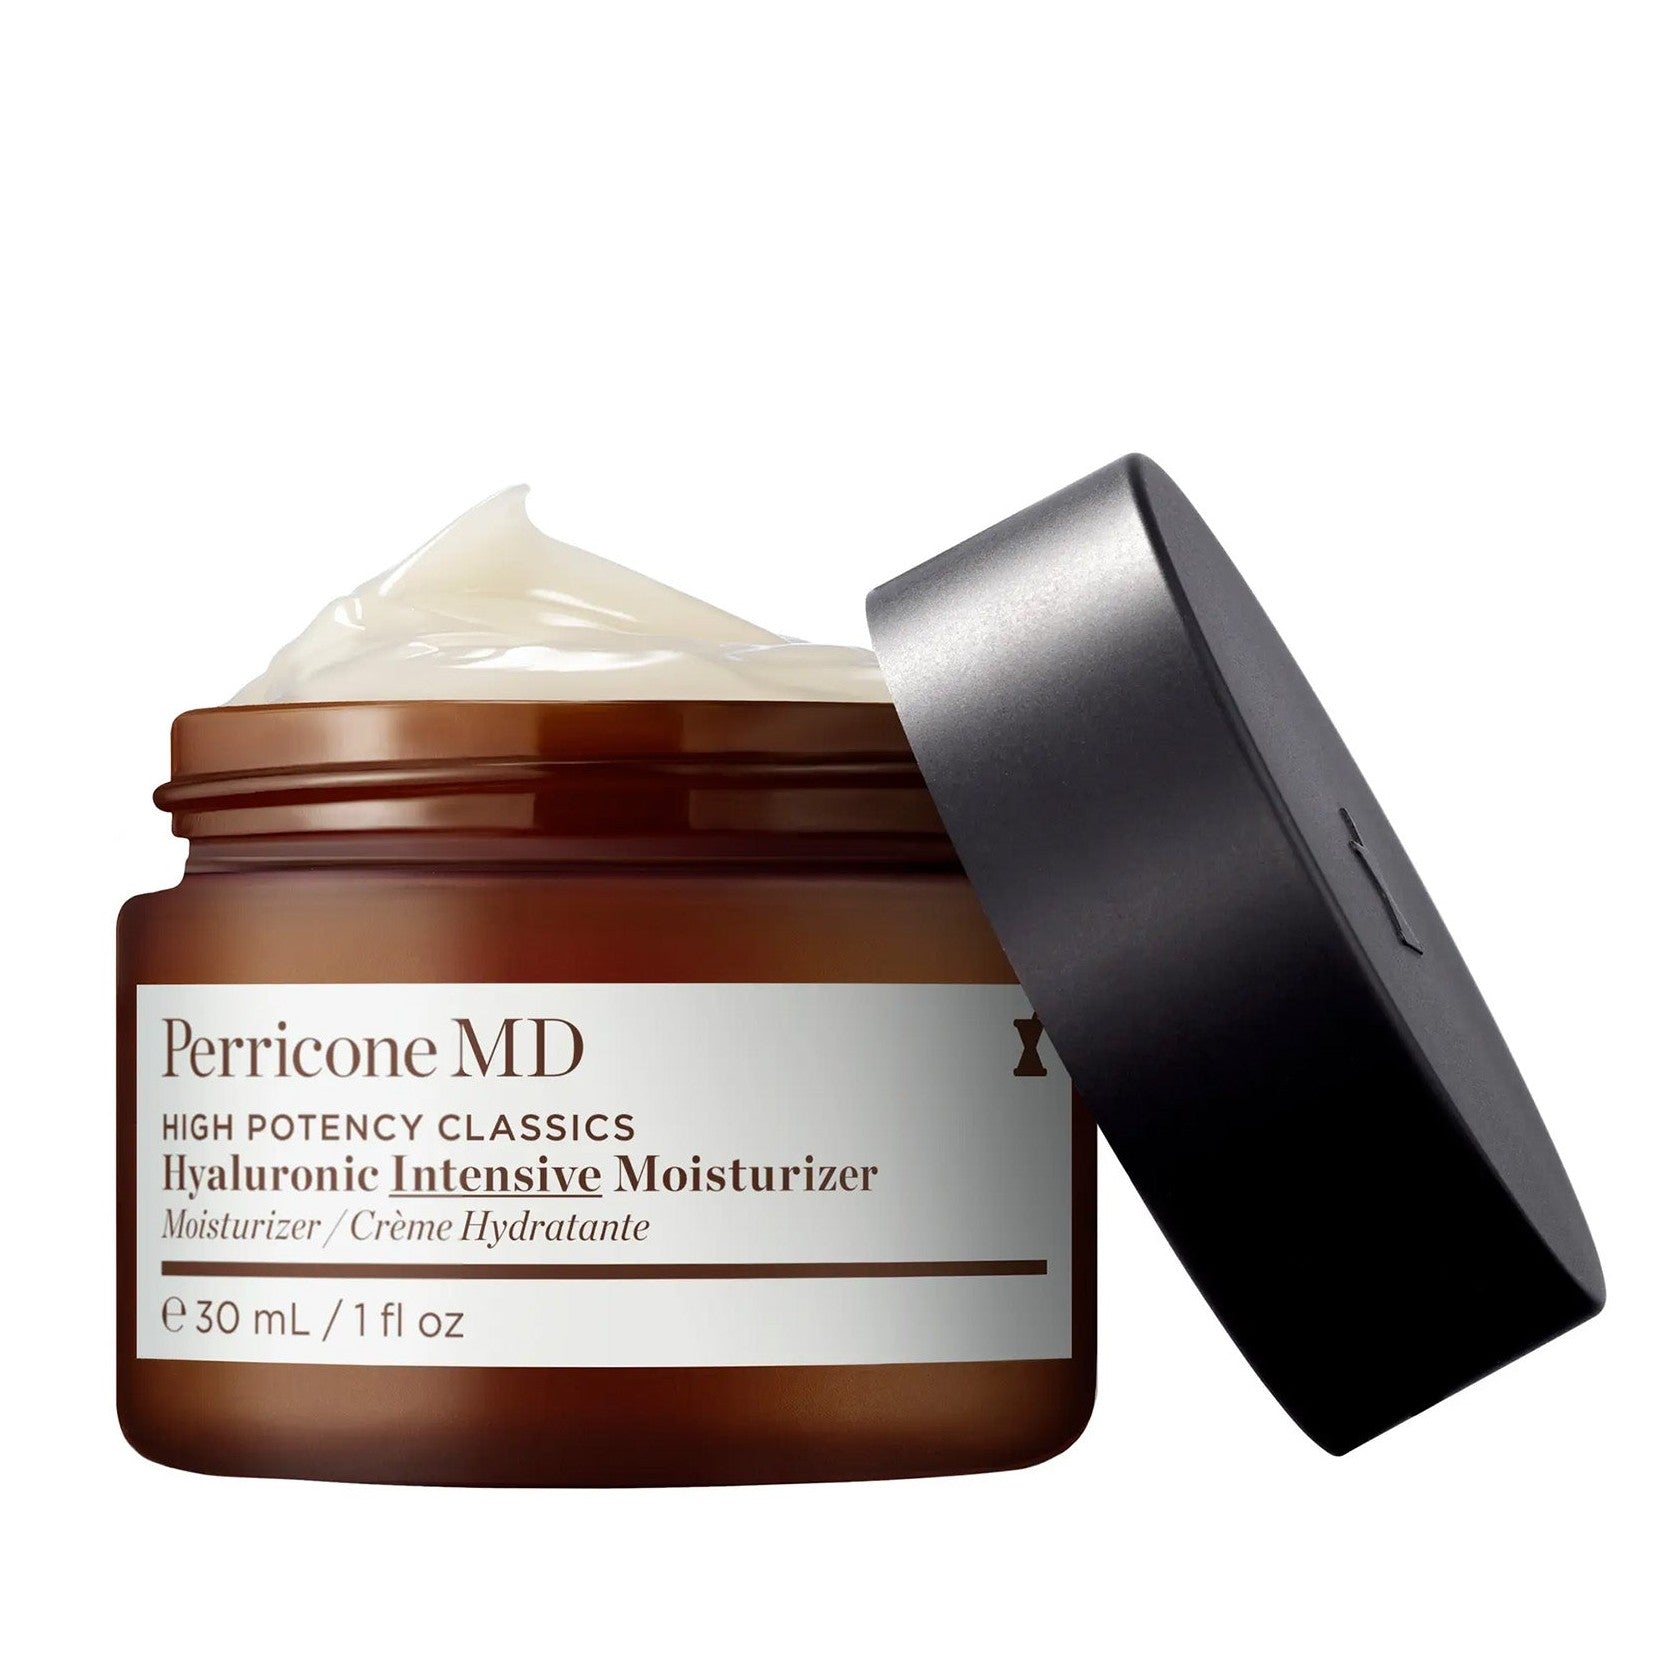 PERRICONE MD High Potency Classics Hyaluronic Intensive Moisturizer